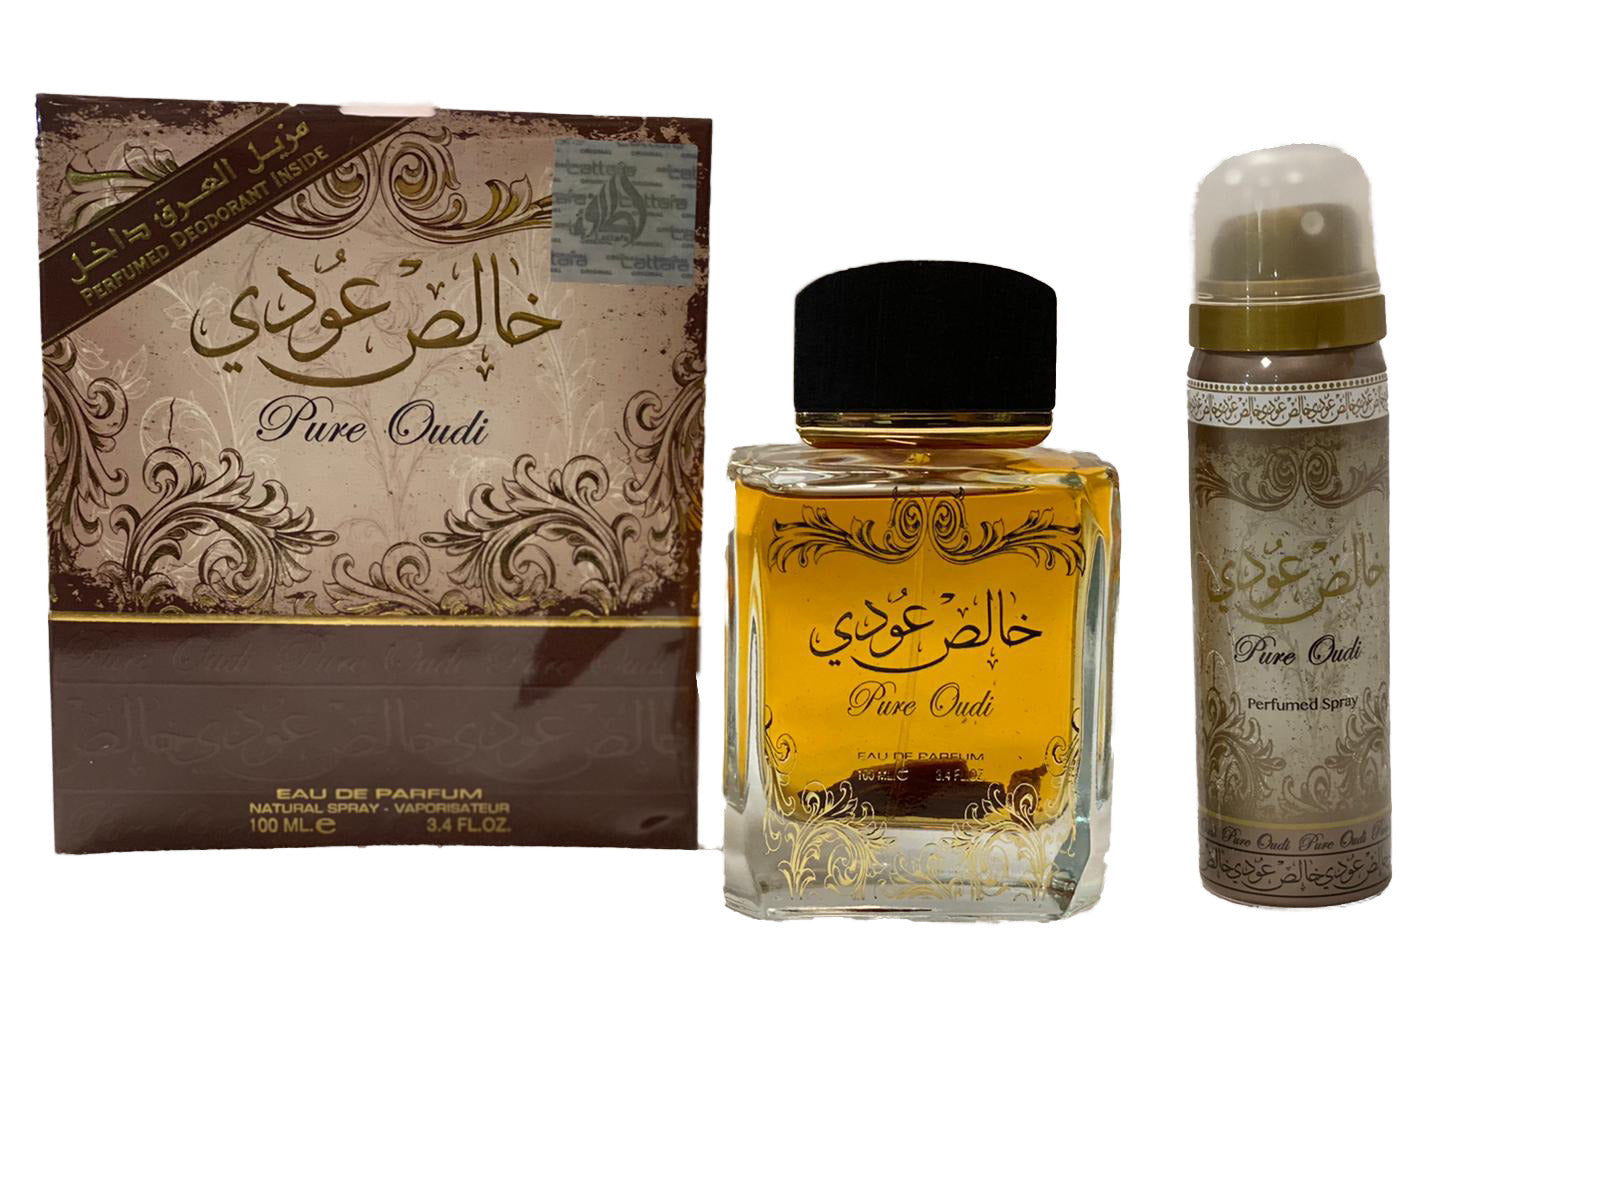 PURE OUD WOOD Edp Perfume Spray 100ml by Fragrance World-rosewood cardamom  Chinese pepper- Tawakkal Perfumes: Buy Online at Best Price in Egypt - Souq  is now